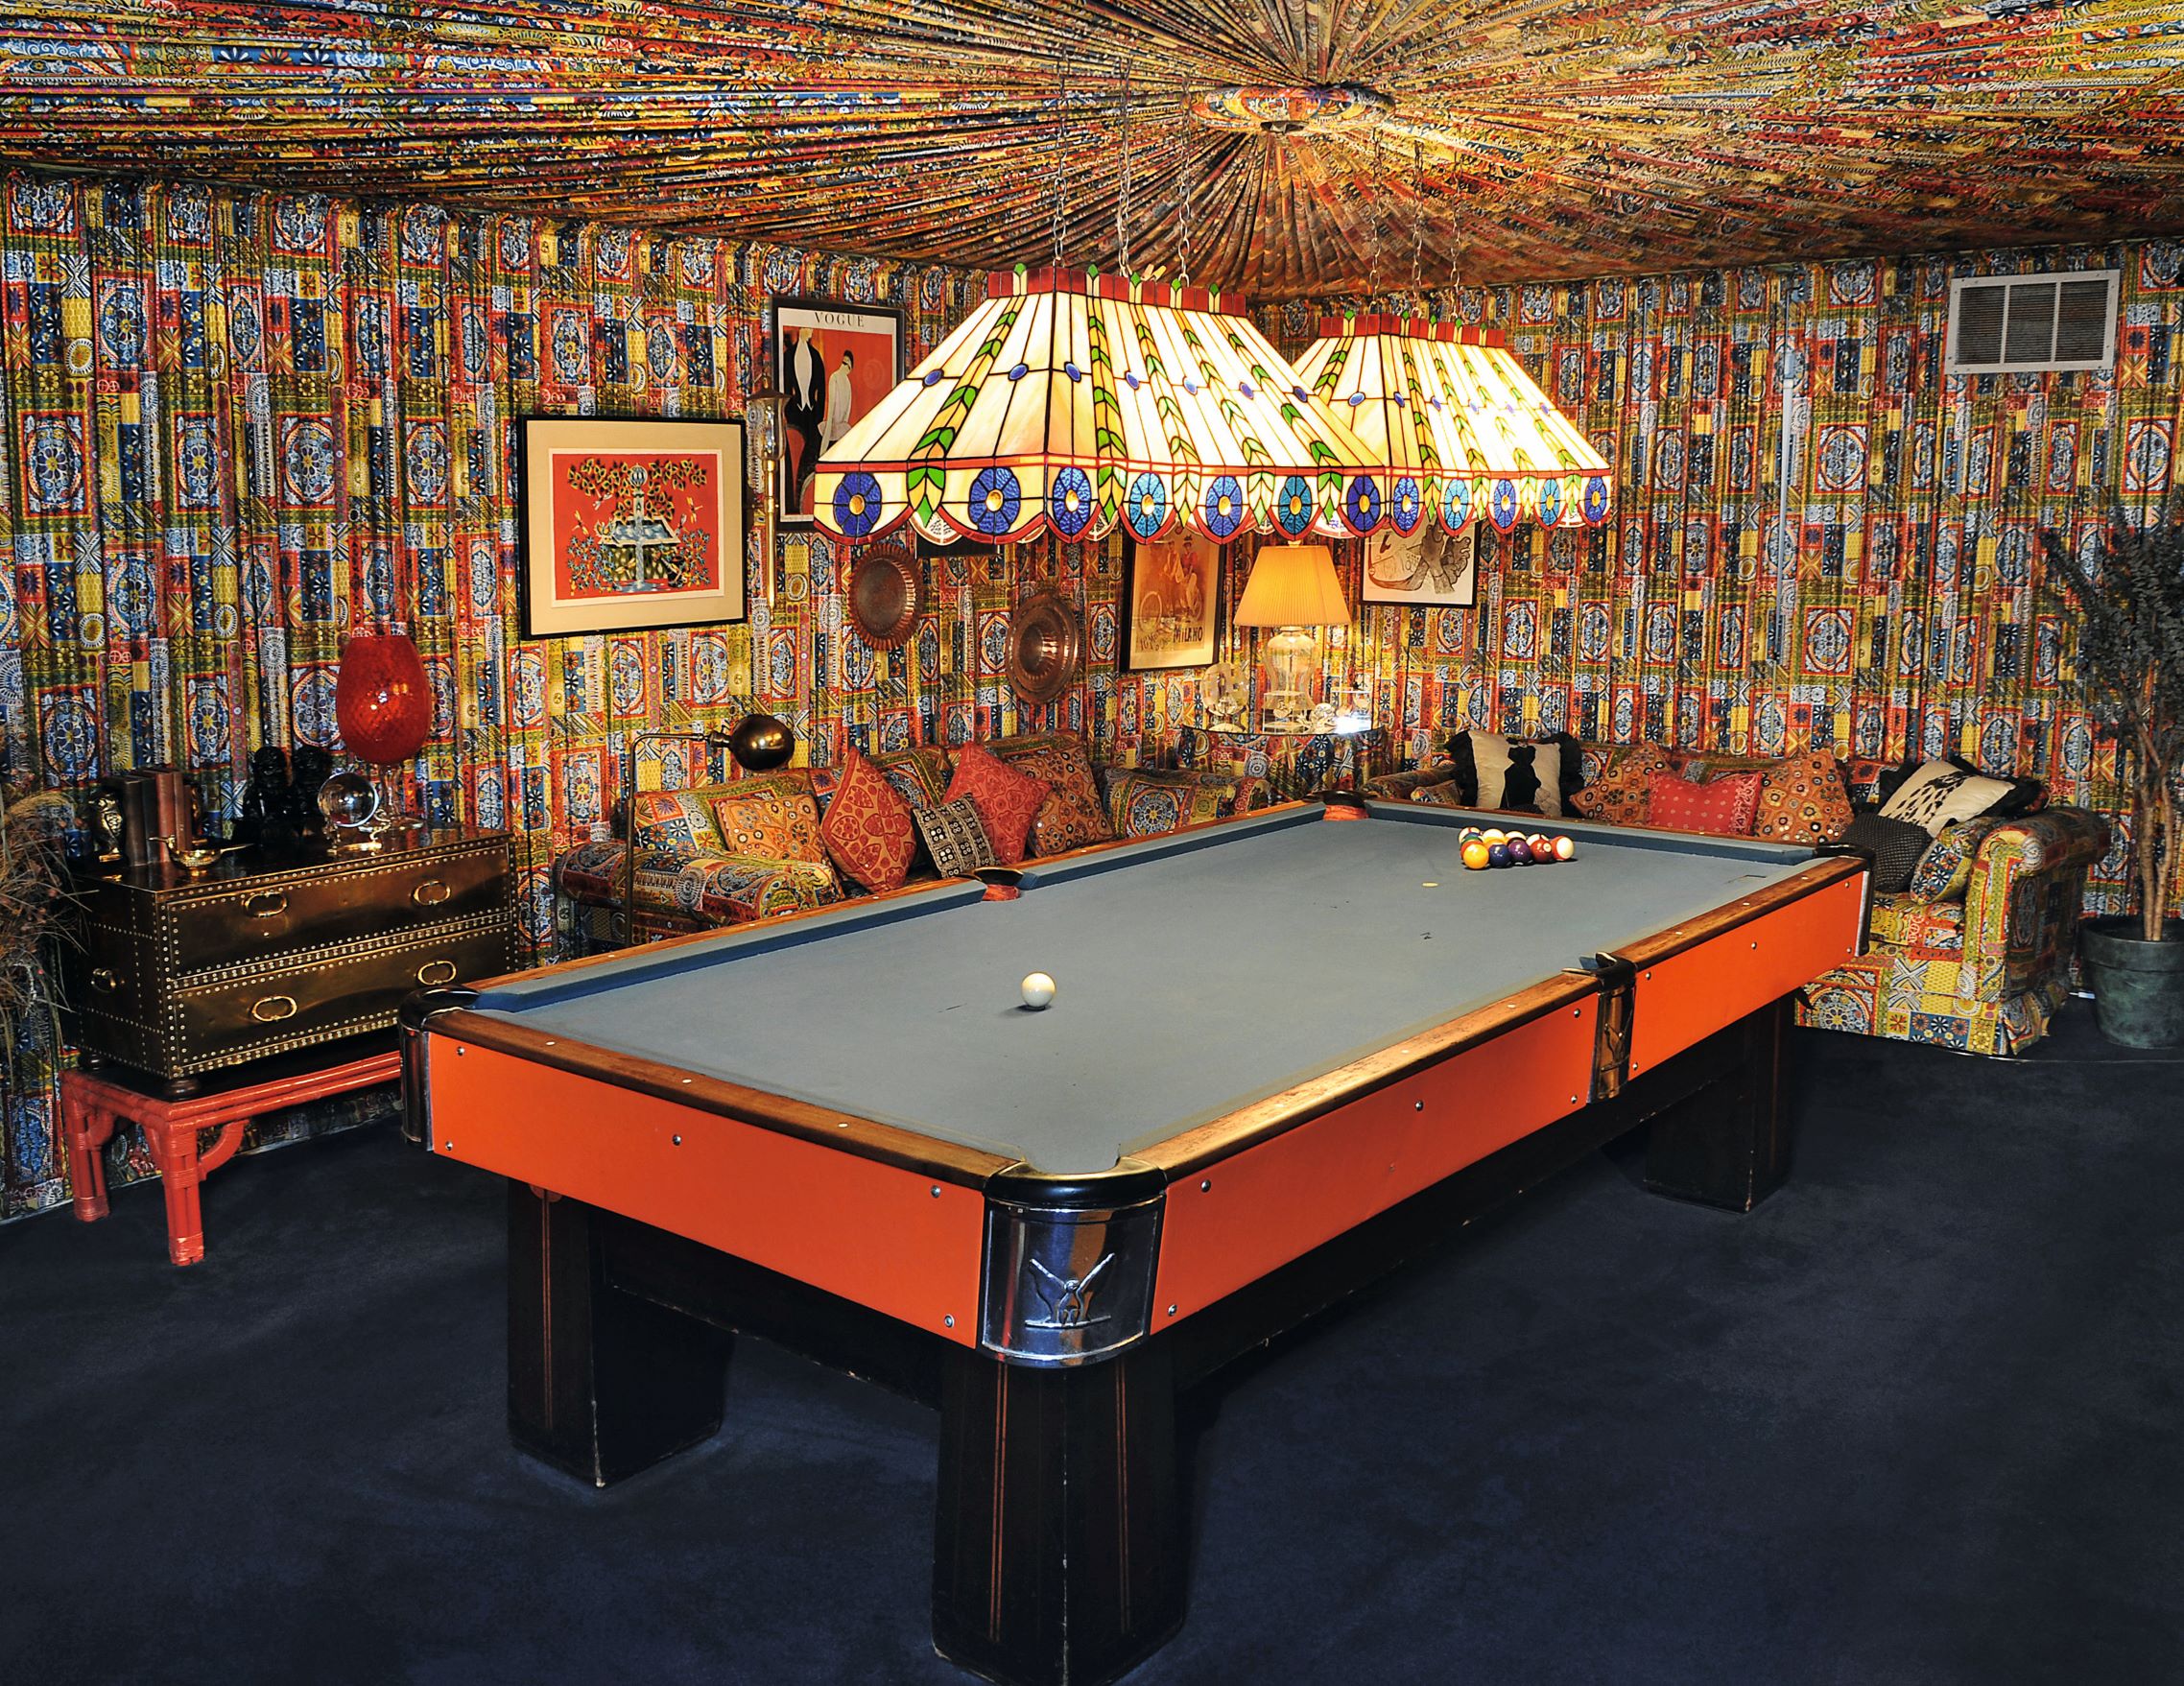 The Pool Room at at Graceland, Memphis, Tennessee, USA. Open to the public. Singer, actor. Courtesy of Elvis Presley Enterprises, Inc